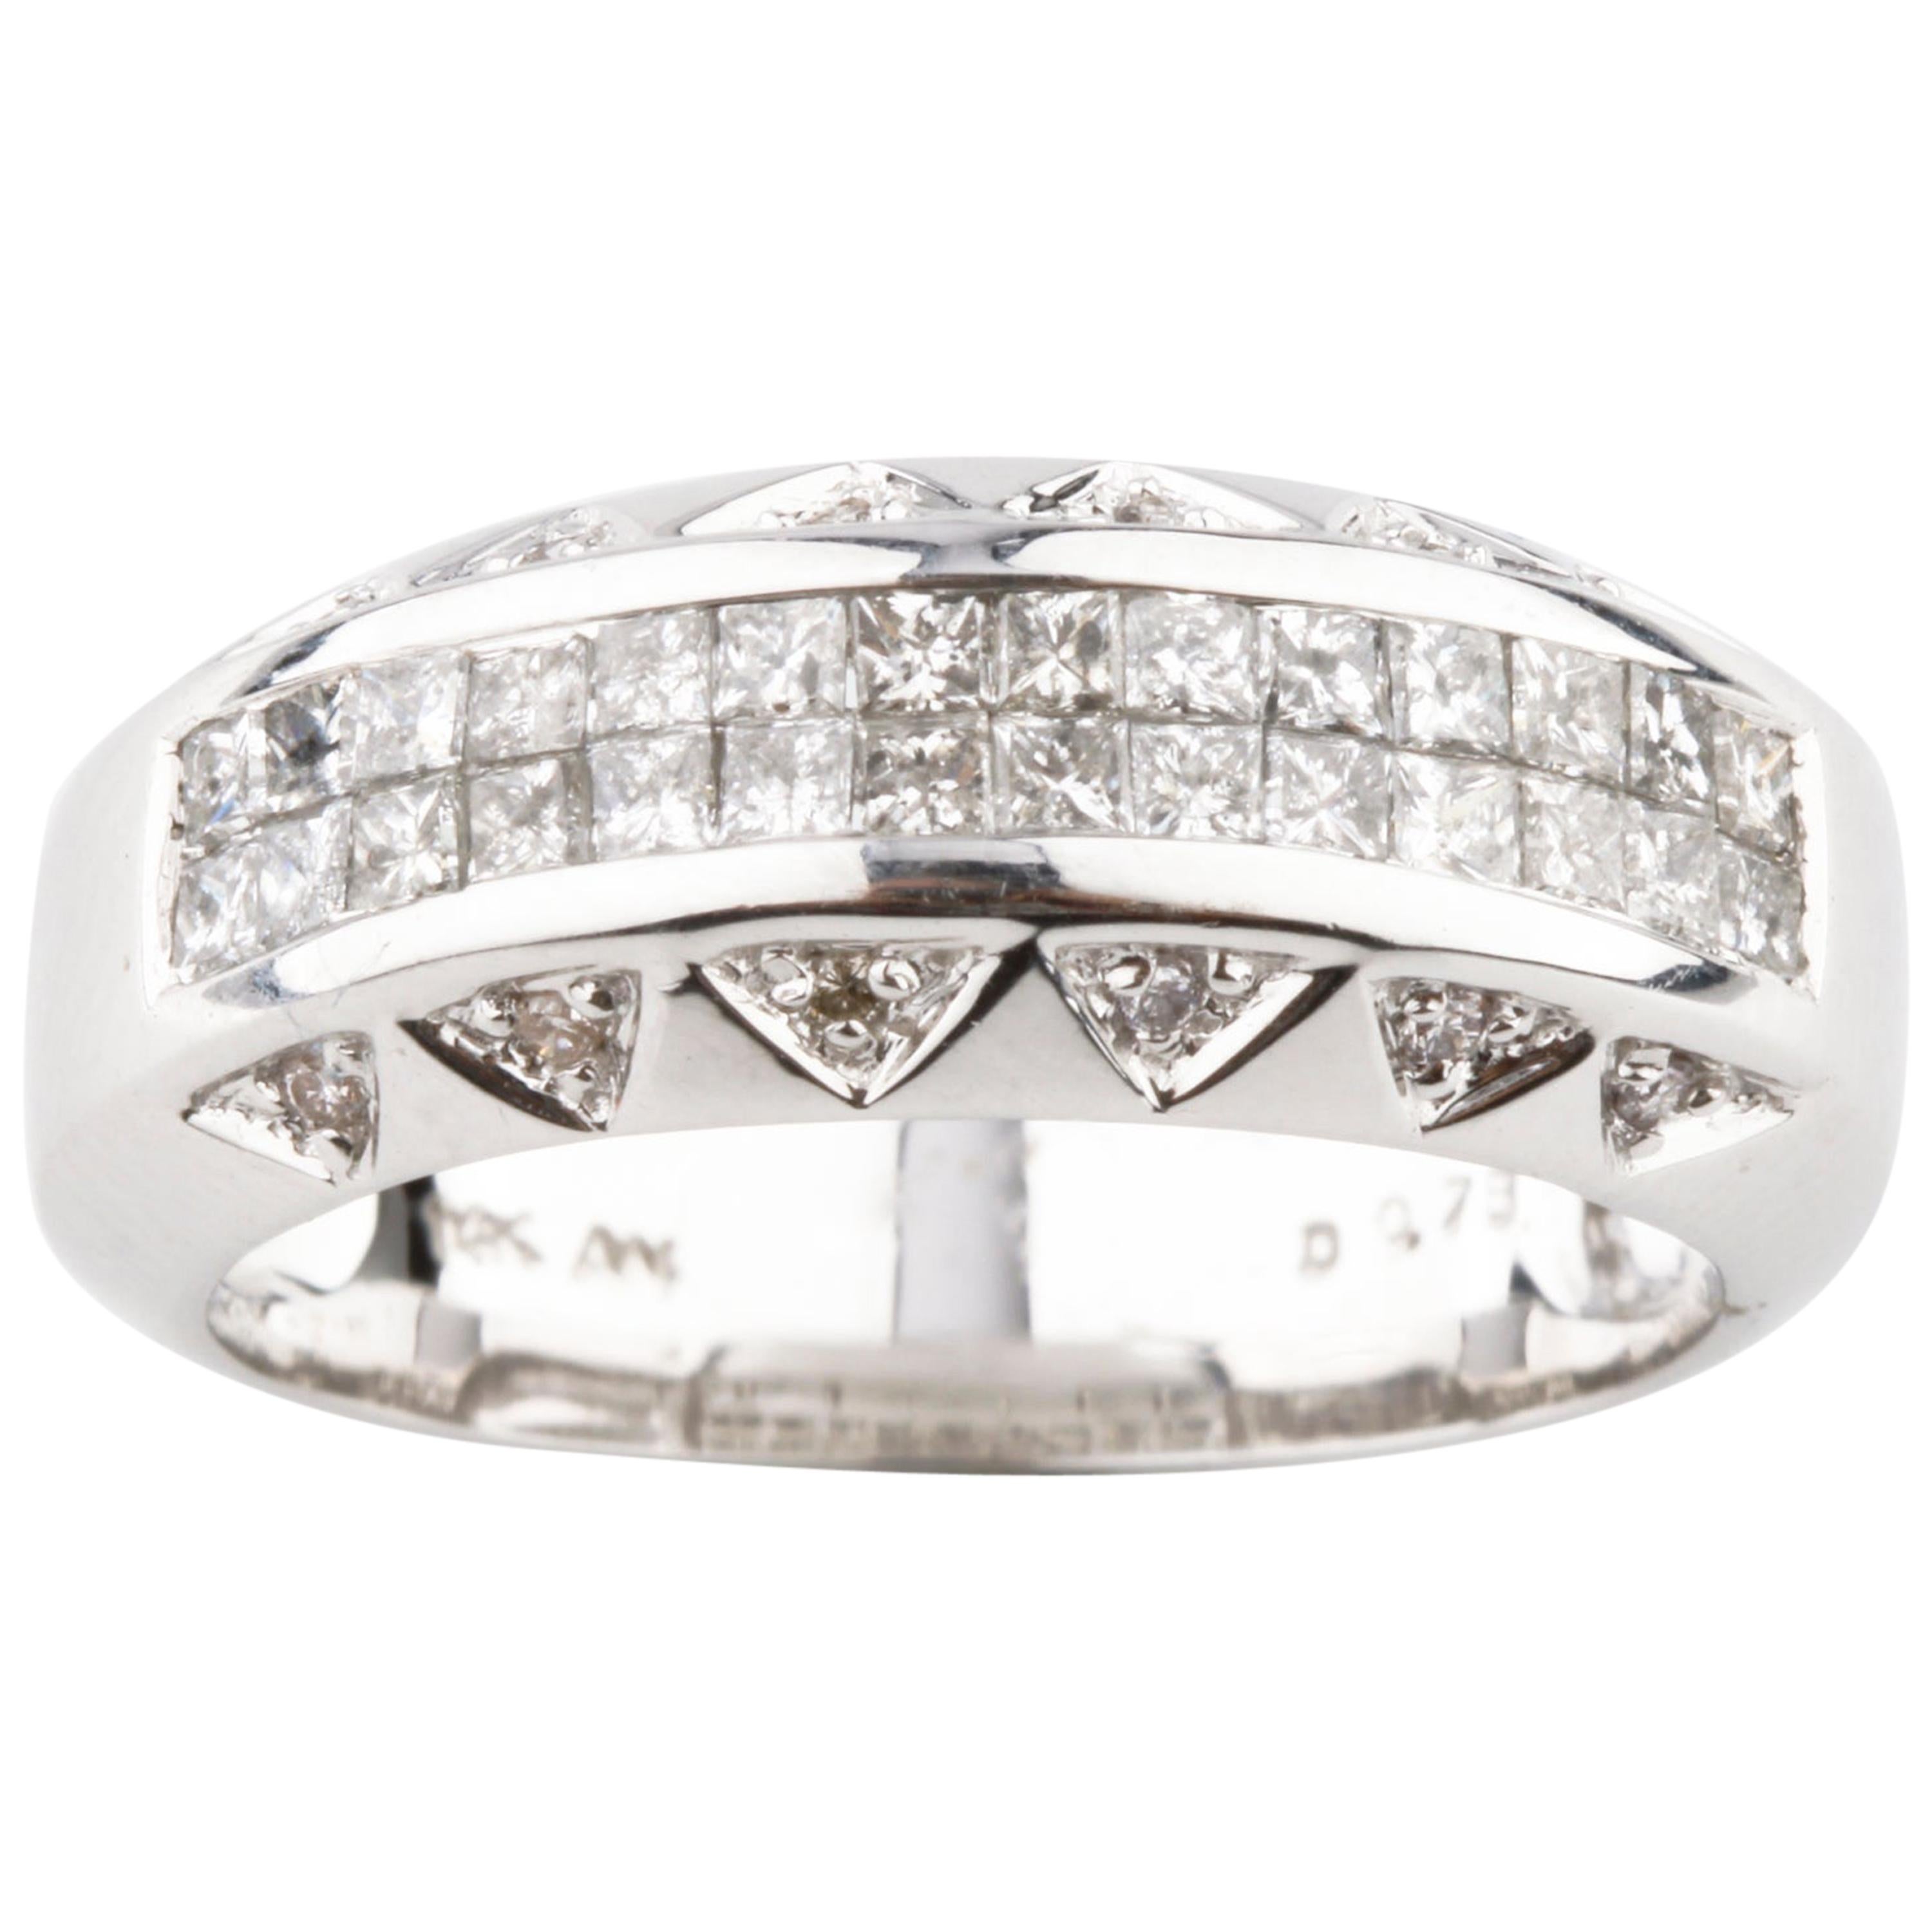 0.76 Carat Diamond Plaque Band Ring in White Gold